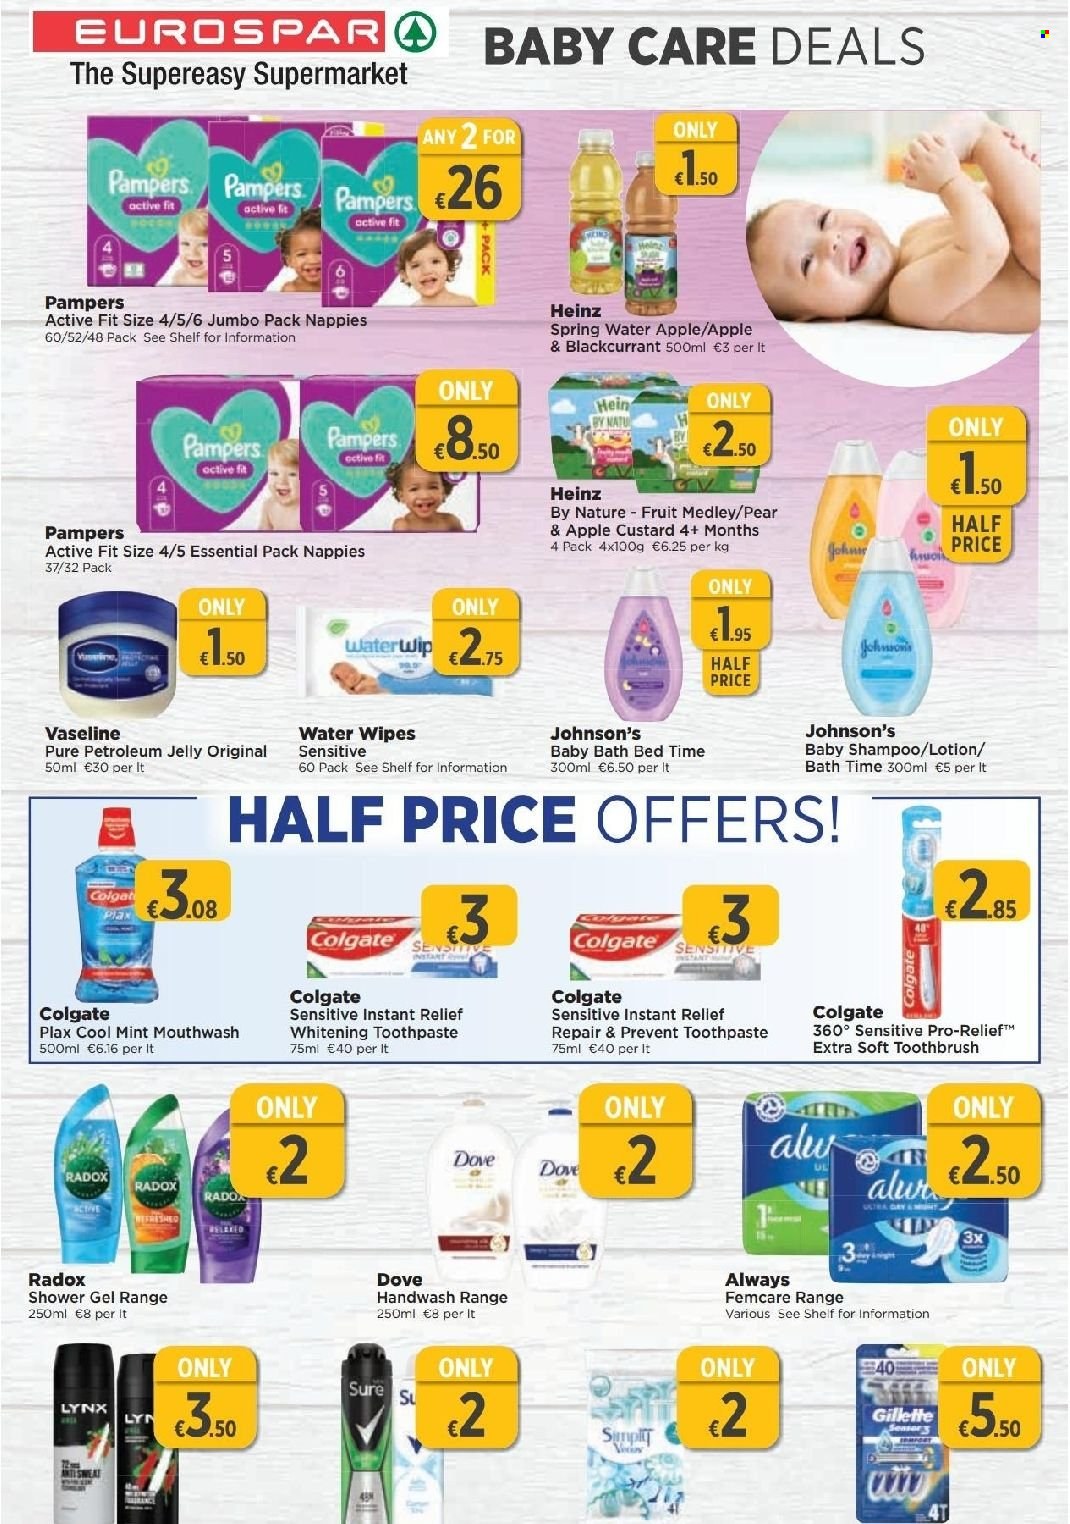 thumbnail - EUROSPAR offer  - 29.09.2022 - 19.10.2022 - Sales products - custard, Dove, Heinz, spring water, wipes, Pampers, nappies, Johnson's, baby bath, petroleum jelly, Joy, shampoo, shower gel, hand wash, Radox, Vaseline, Colgate, toothbrush, toothpaste, mouthwash, Plax, body lotion, Sure, Gillette. Page 12.